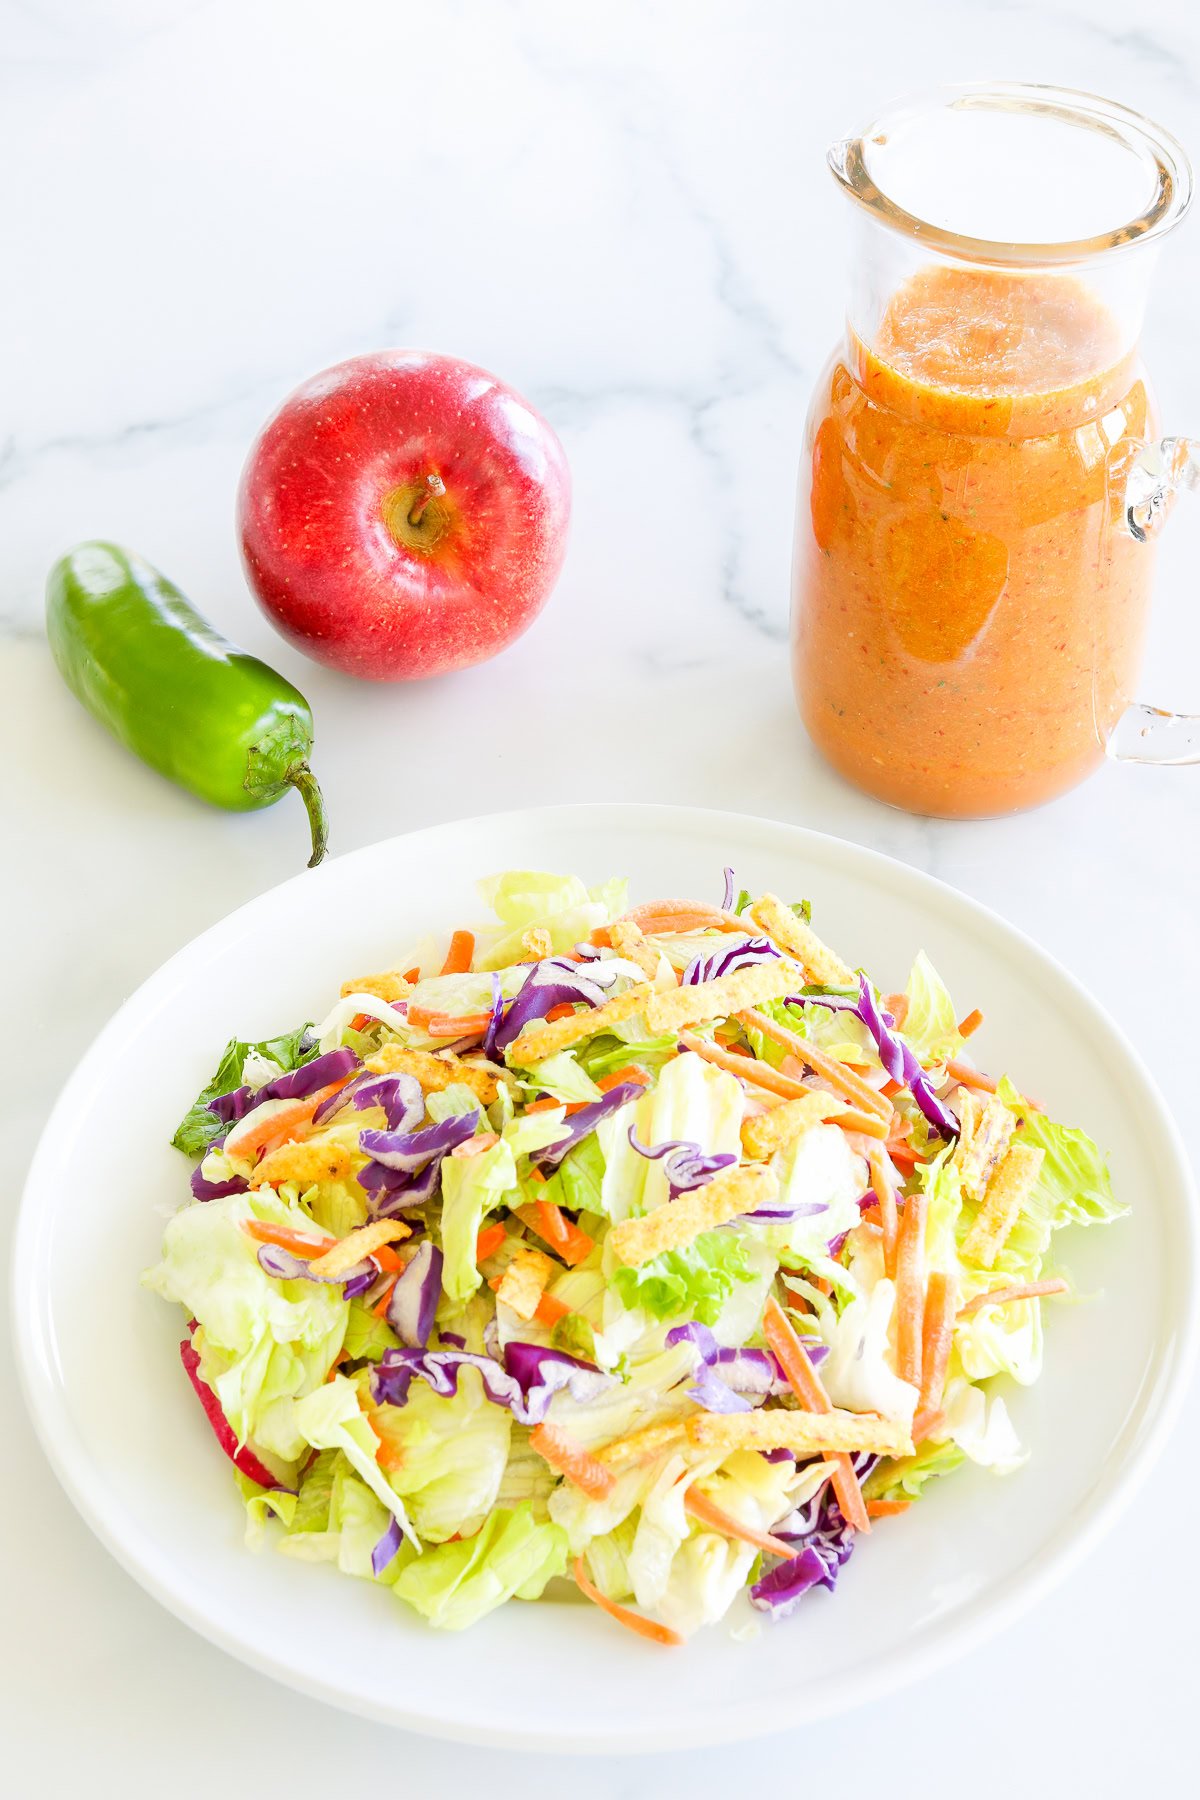 A vibrant salad with mixed vegetables on a white plate, a red apple, and a jar of chipotle salad dressing beside a green jalapeño on a marble surface.